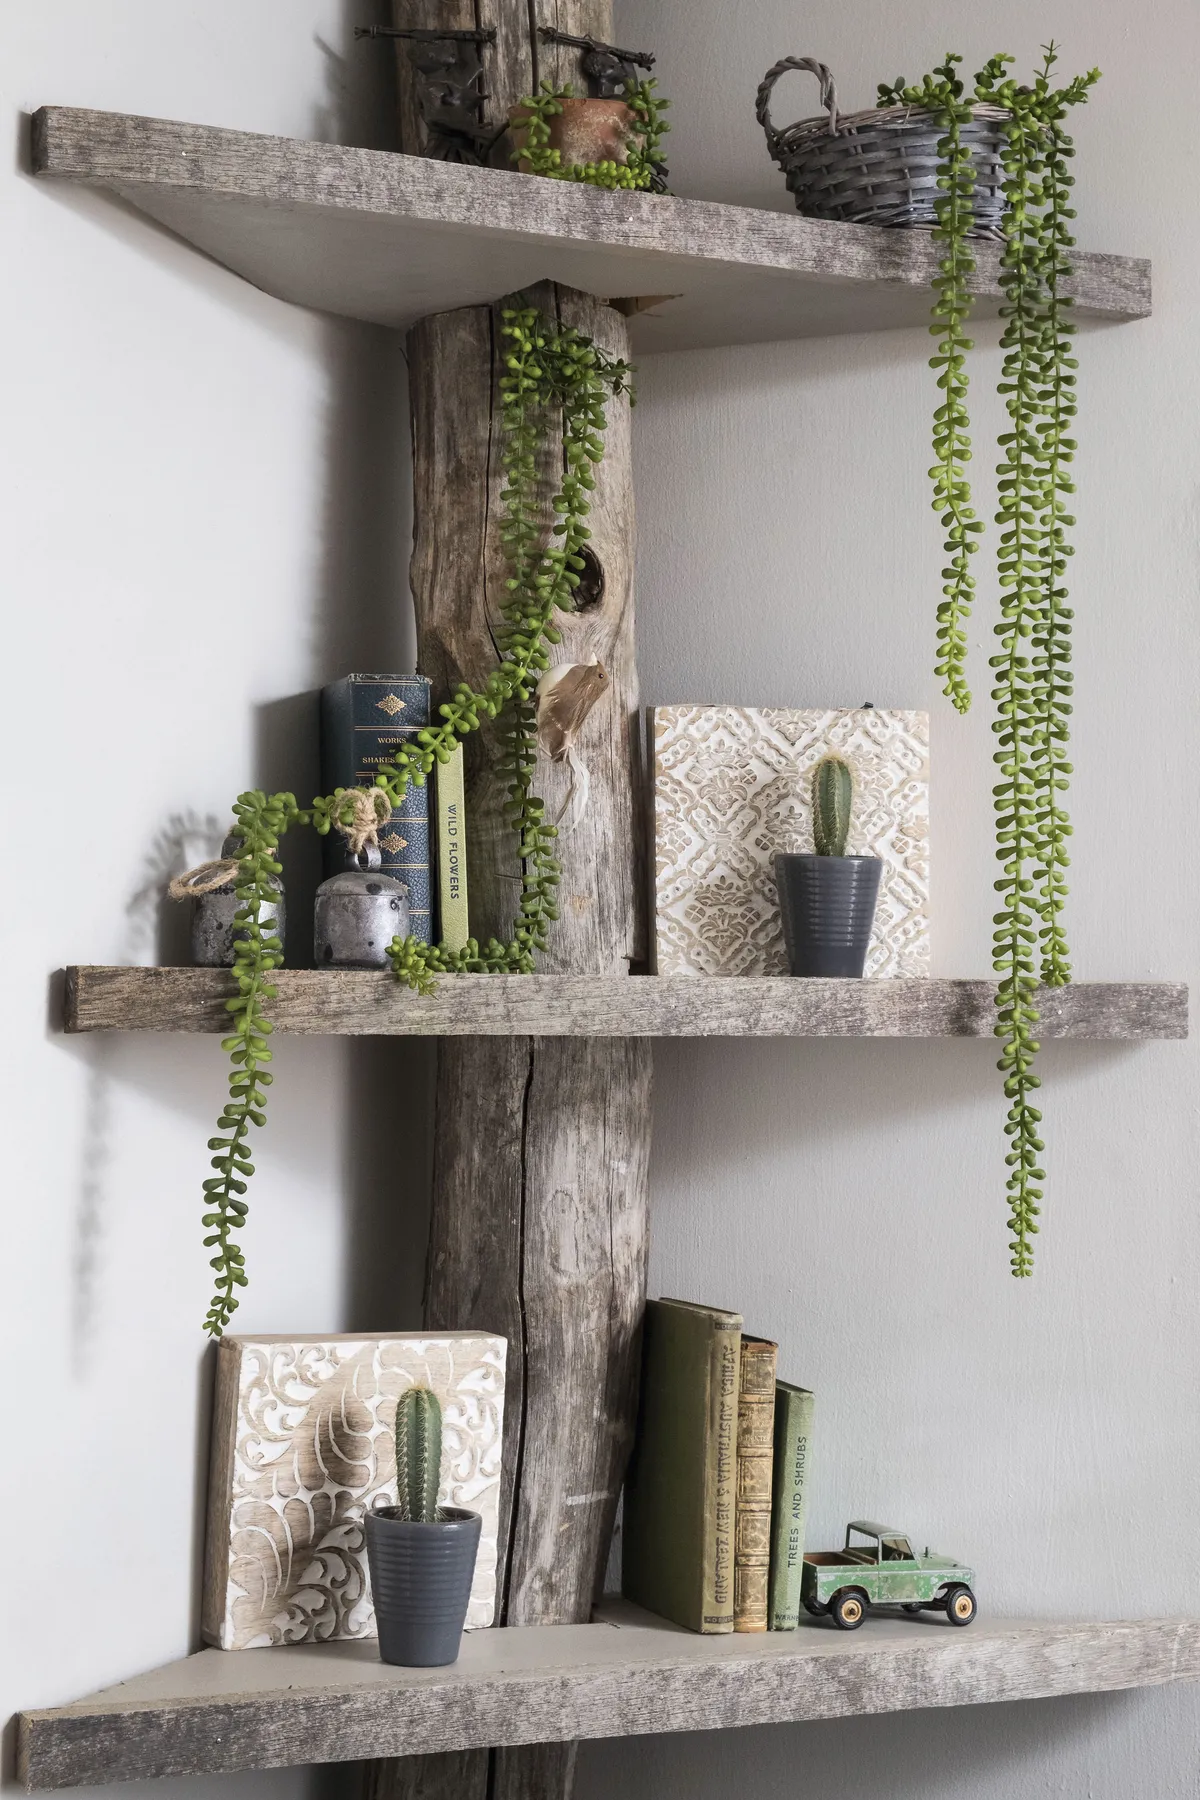 Danecia hasn’t let an inch of space go to waste. She’s injected this corner with character and colour, adding quirky handmade shelving and trailing greenery